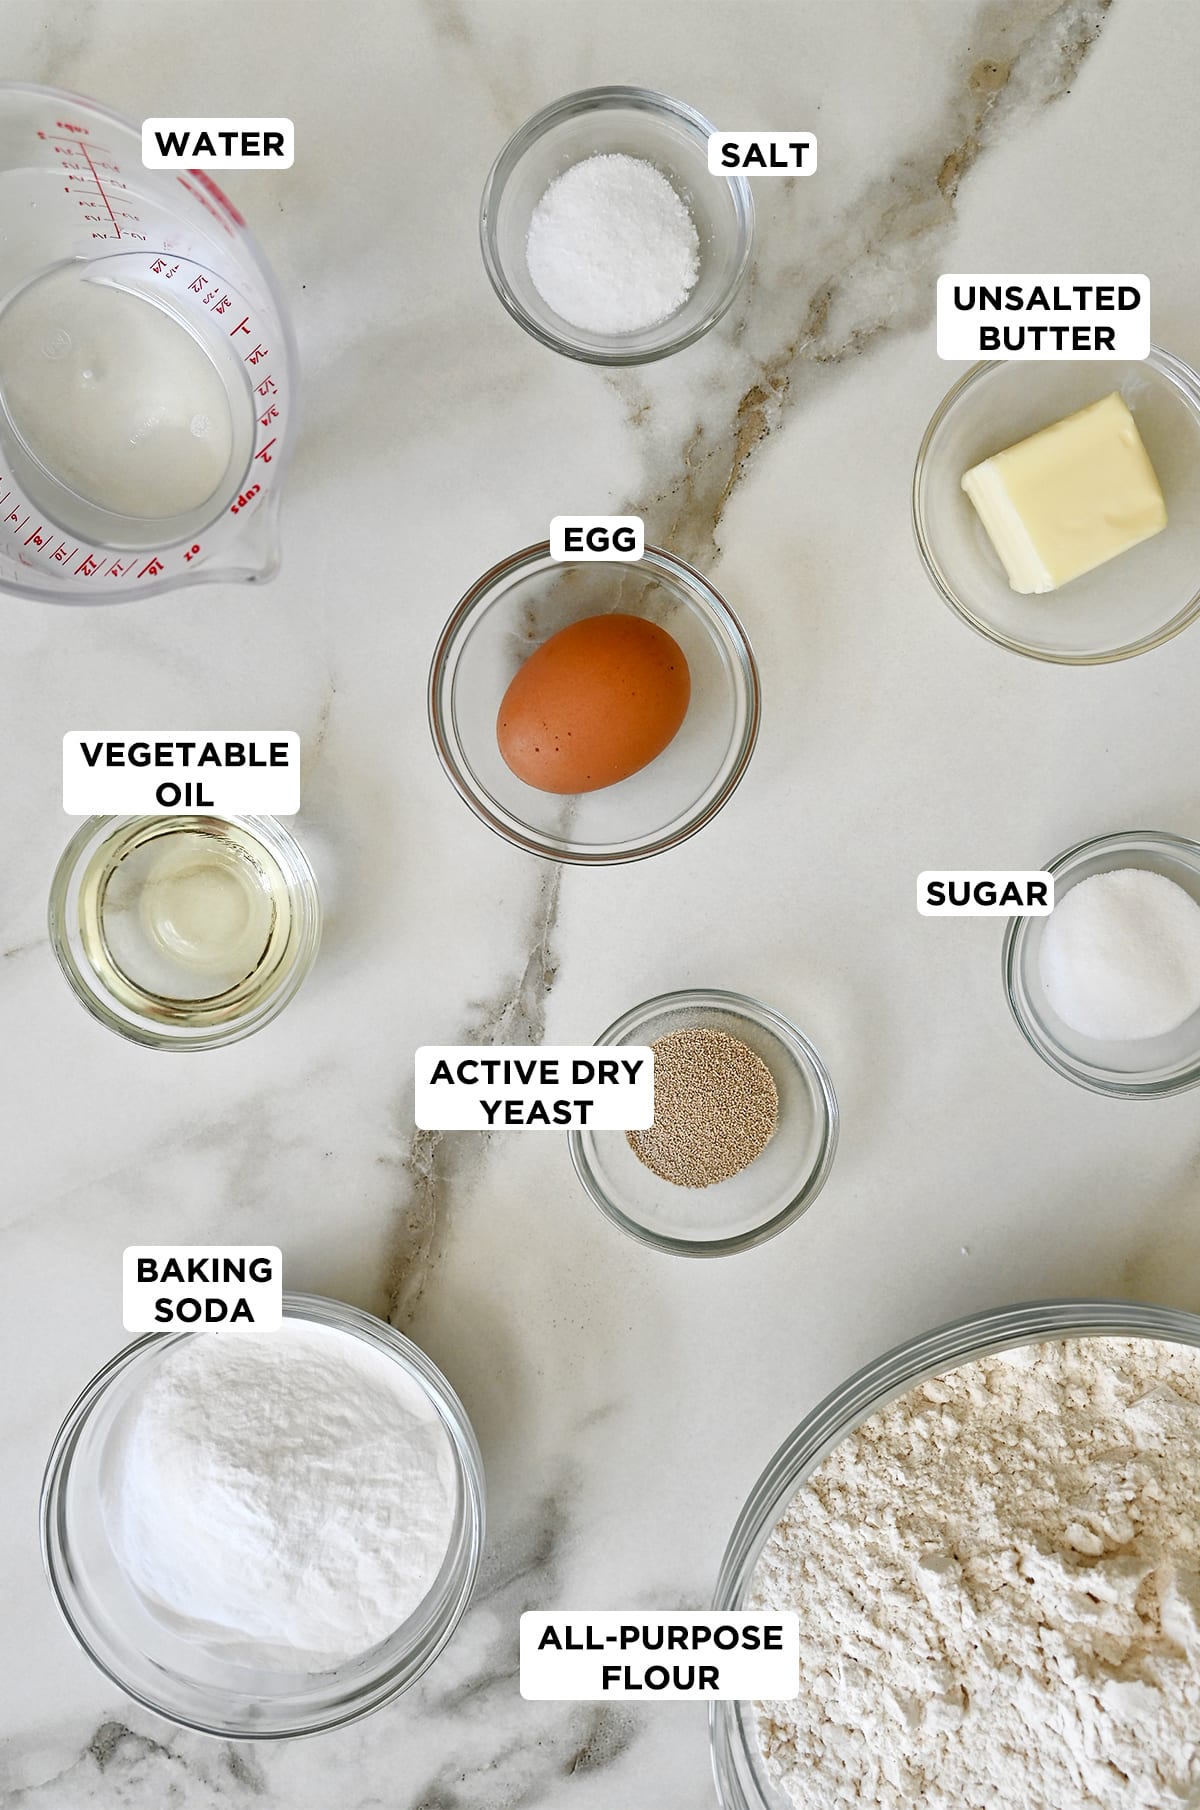 Various sizes of glass bowls containing ingredients to make soft pretzels, including water, salt, butter, sugar, active dry yeast, all-purpose flour, baking soda and vegetable oil. 